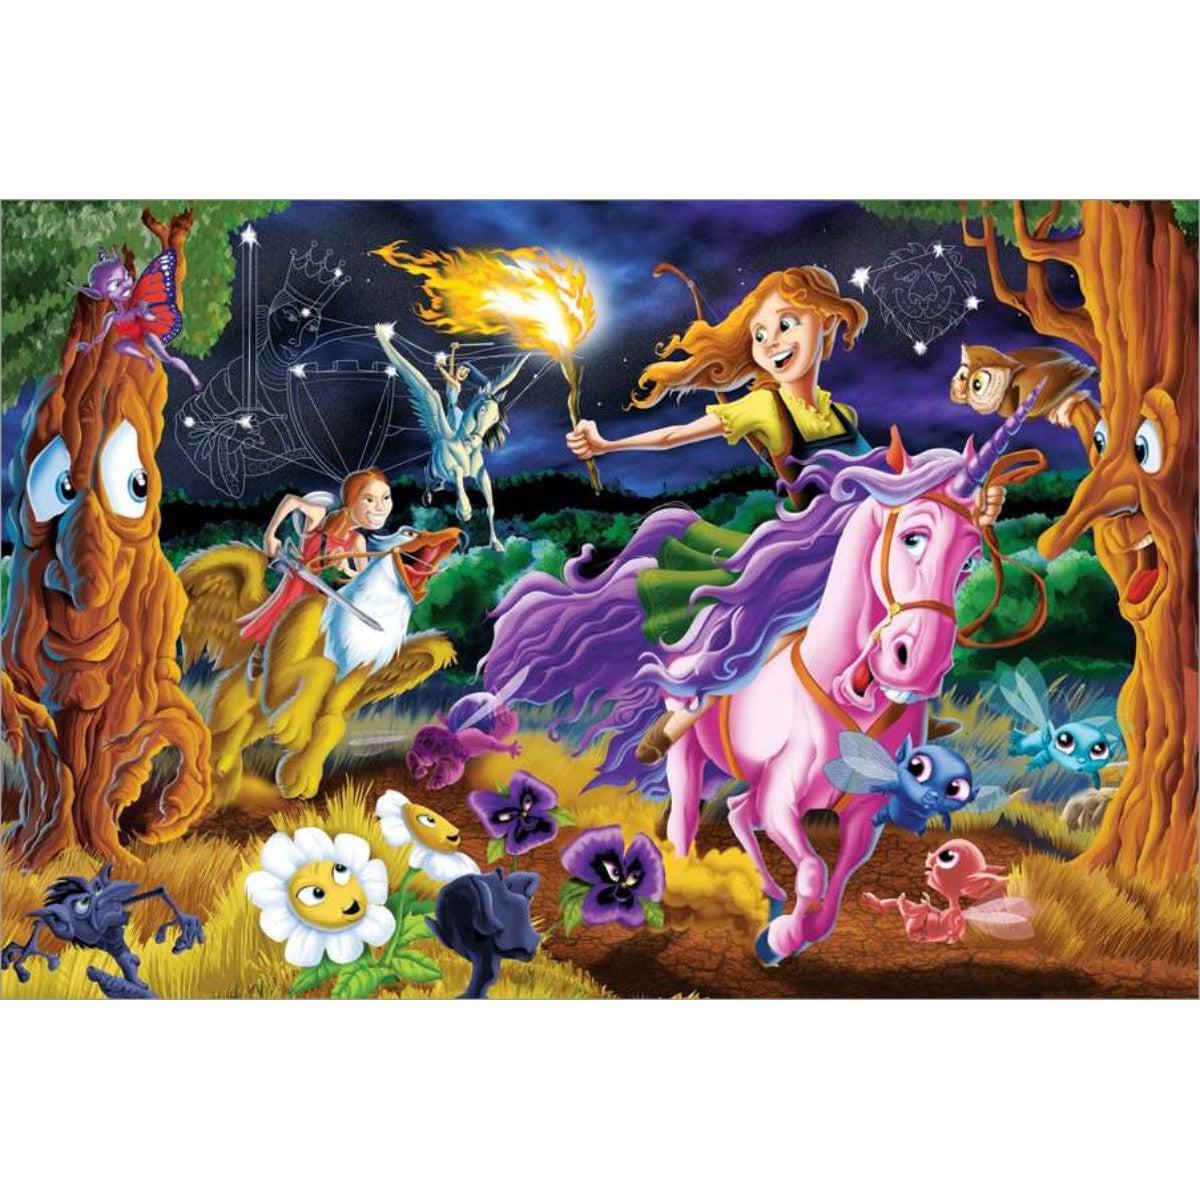 Mystical World 350 Piece Family Jigsaw Puzzle Cobble Hill